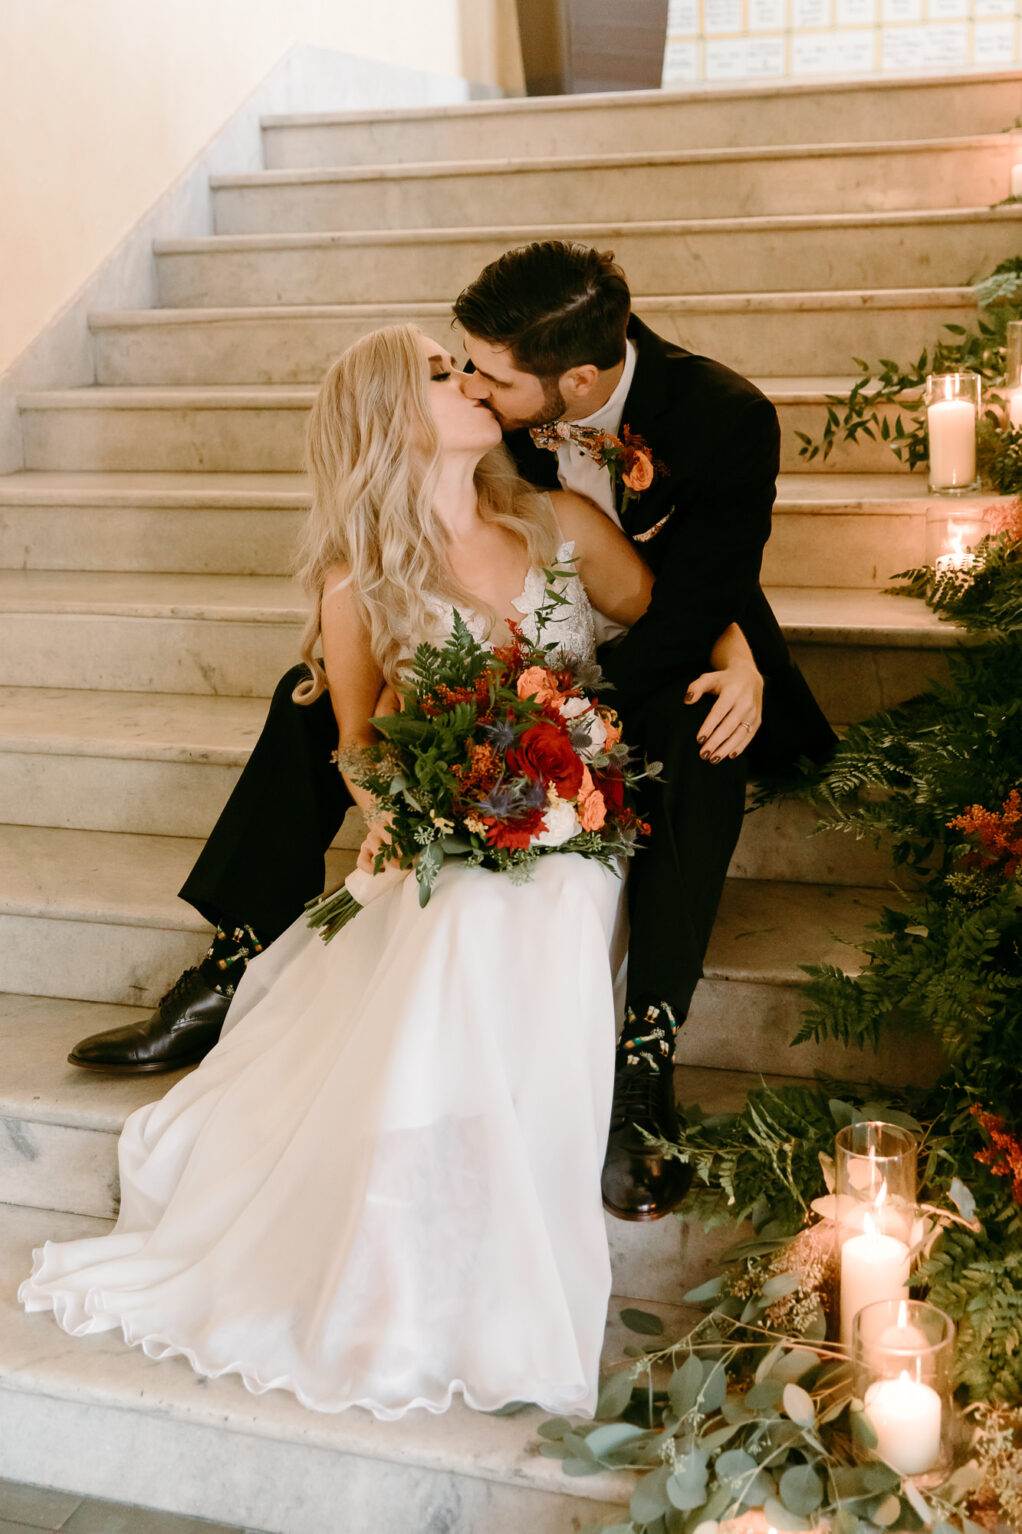 Bride and Groom Kissing on Staircase with Lust Flowers, Greenery and Candles